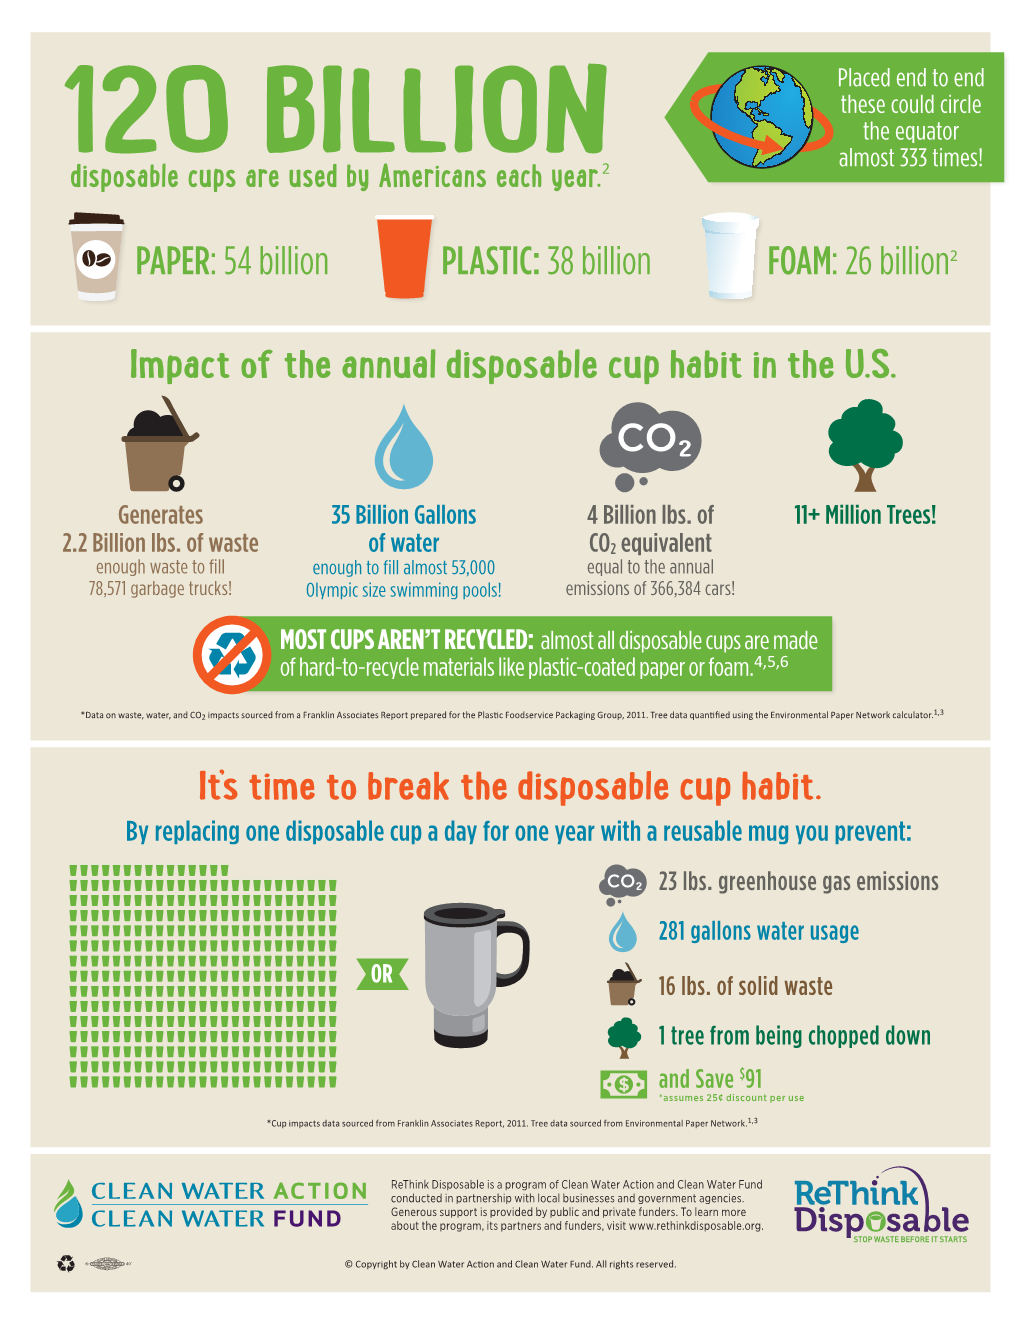 120 BILLION2 Disposable Cups Are Used by Americans Each Year